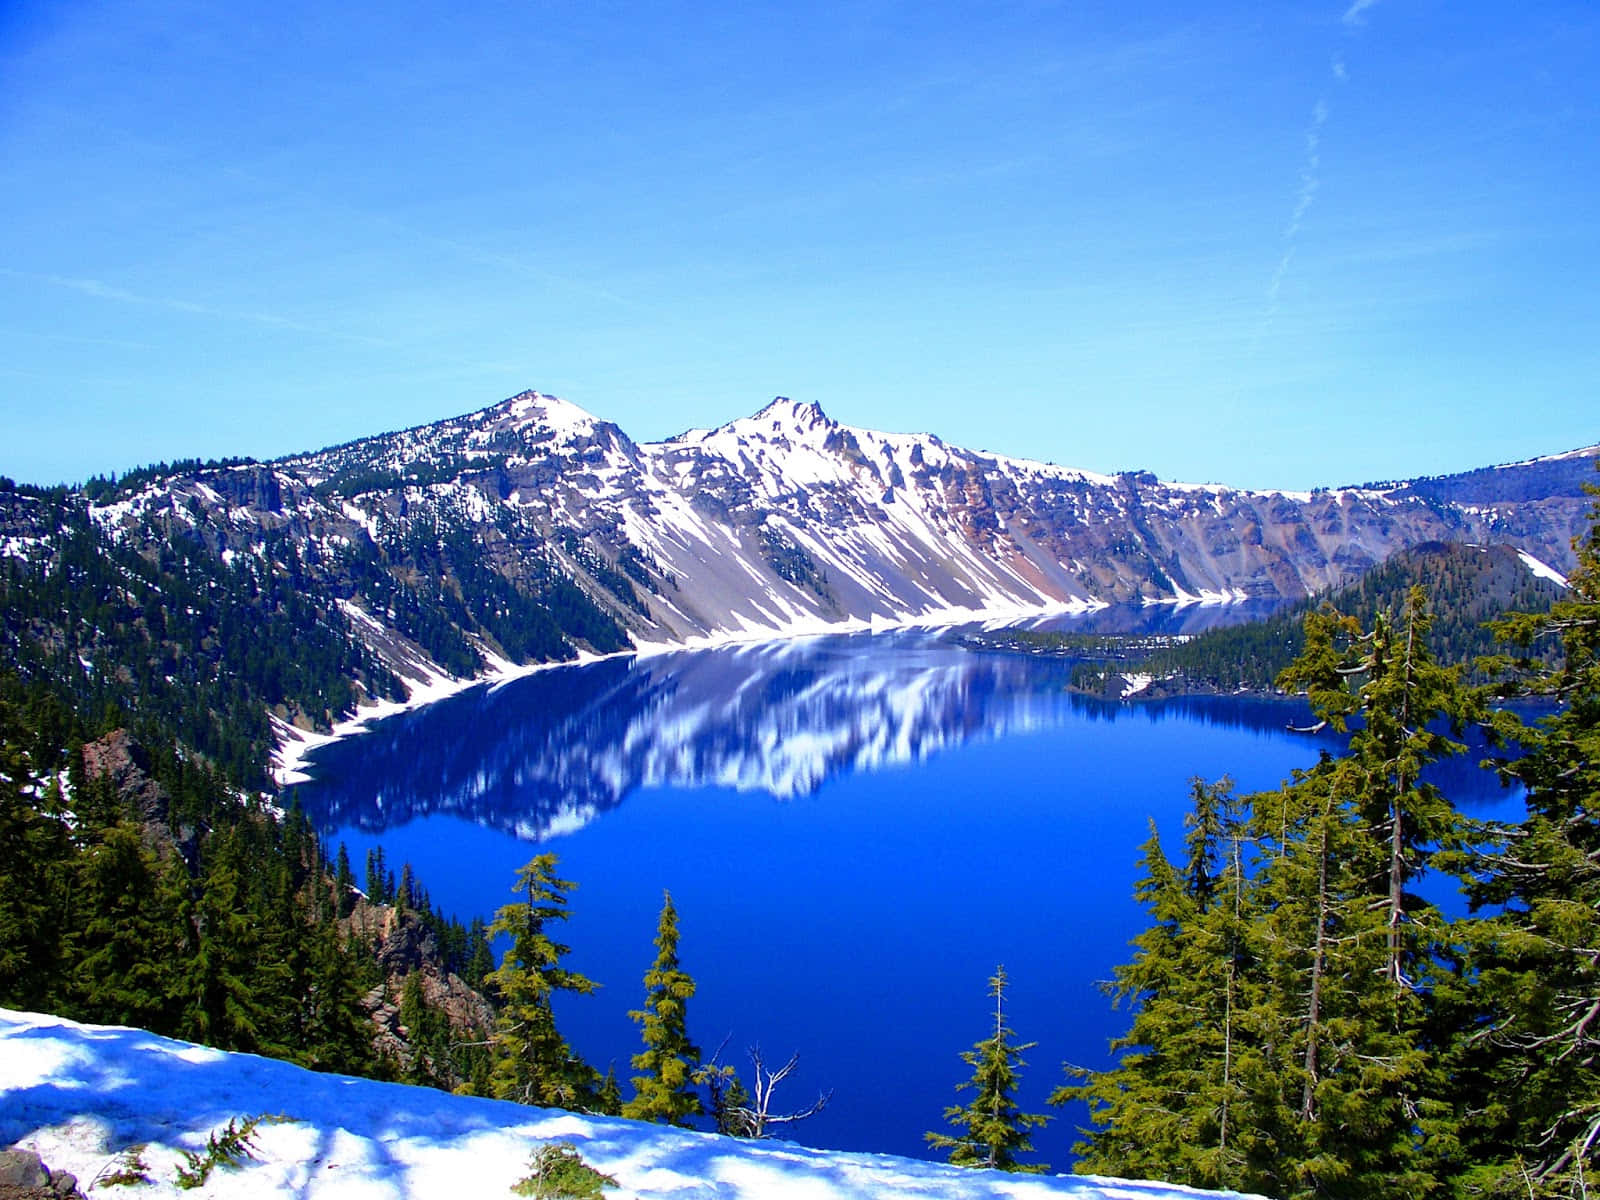 A Blue Lake In The Mountains